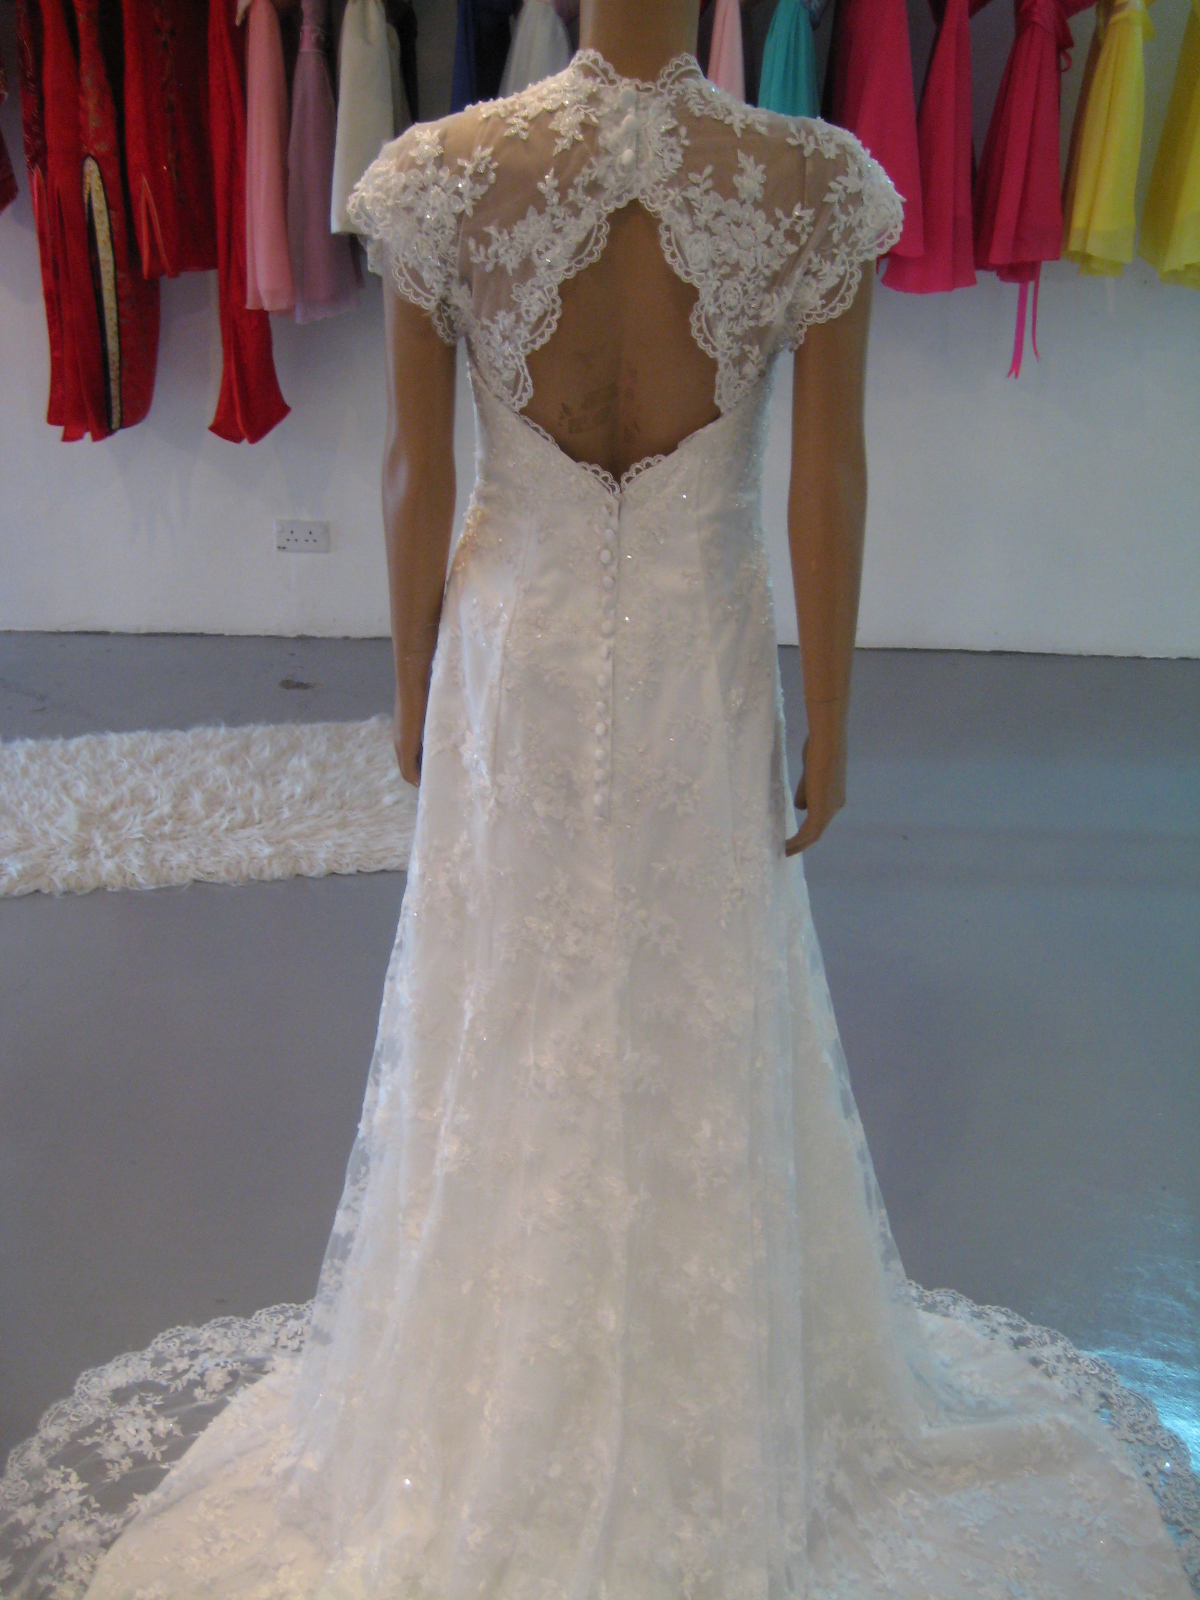 lace wedding dress with cap sleeves Posted by mybridalgown at 8:17 PM